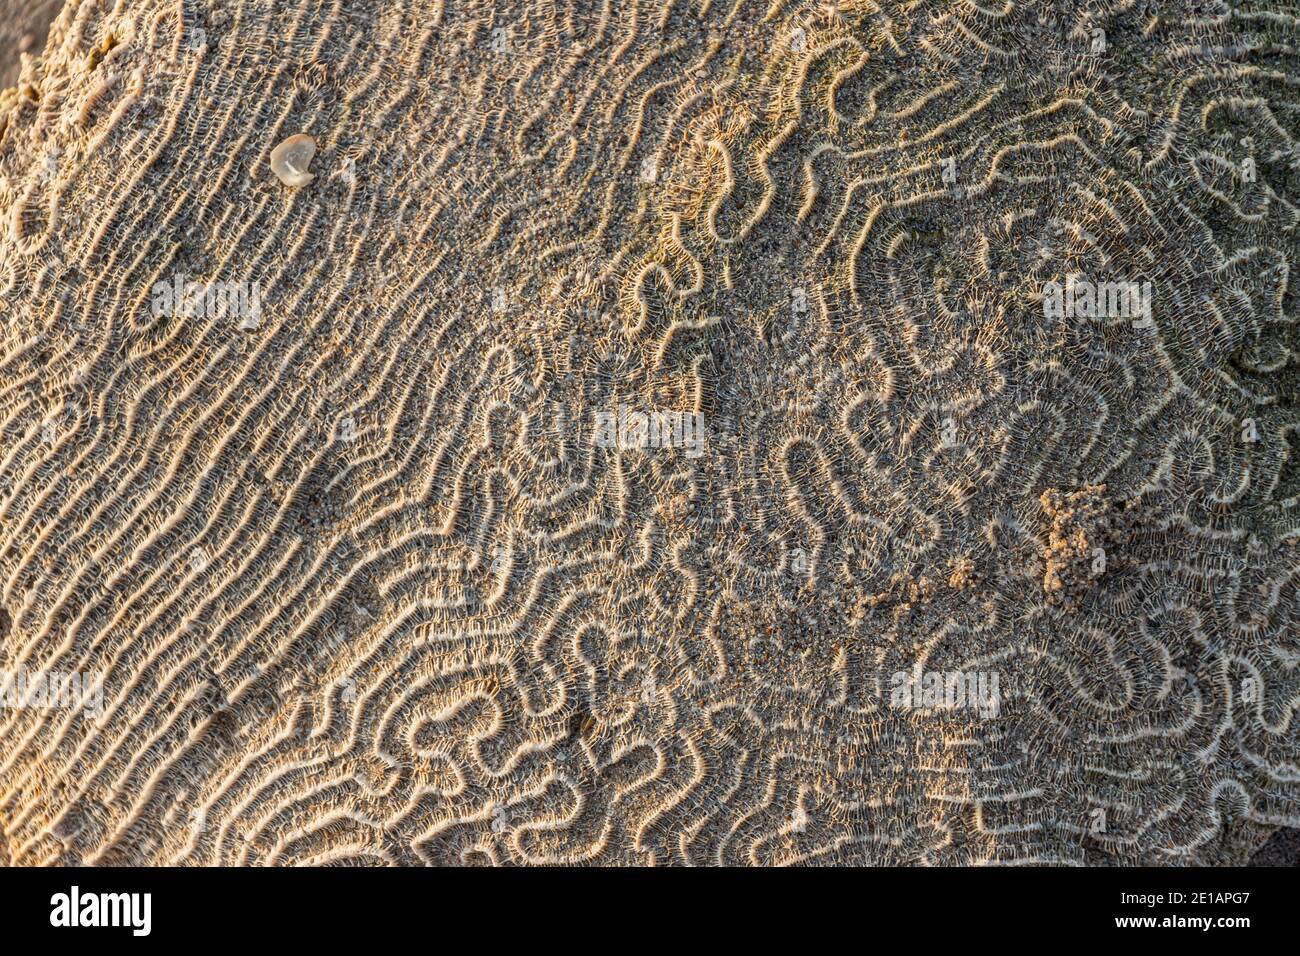 A very detailed coral surface exposing its lines and patterns under the sunlight Stock Photo